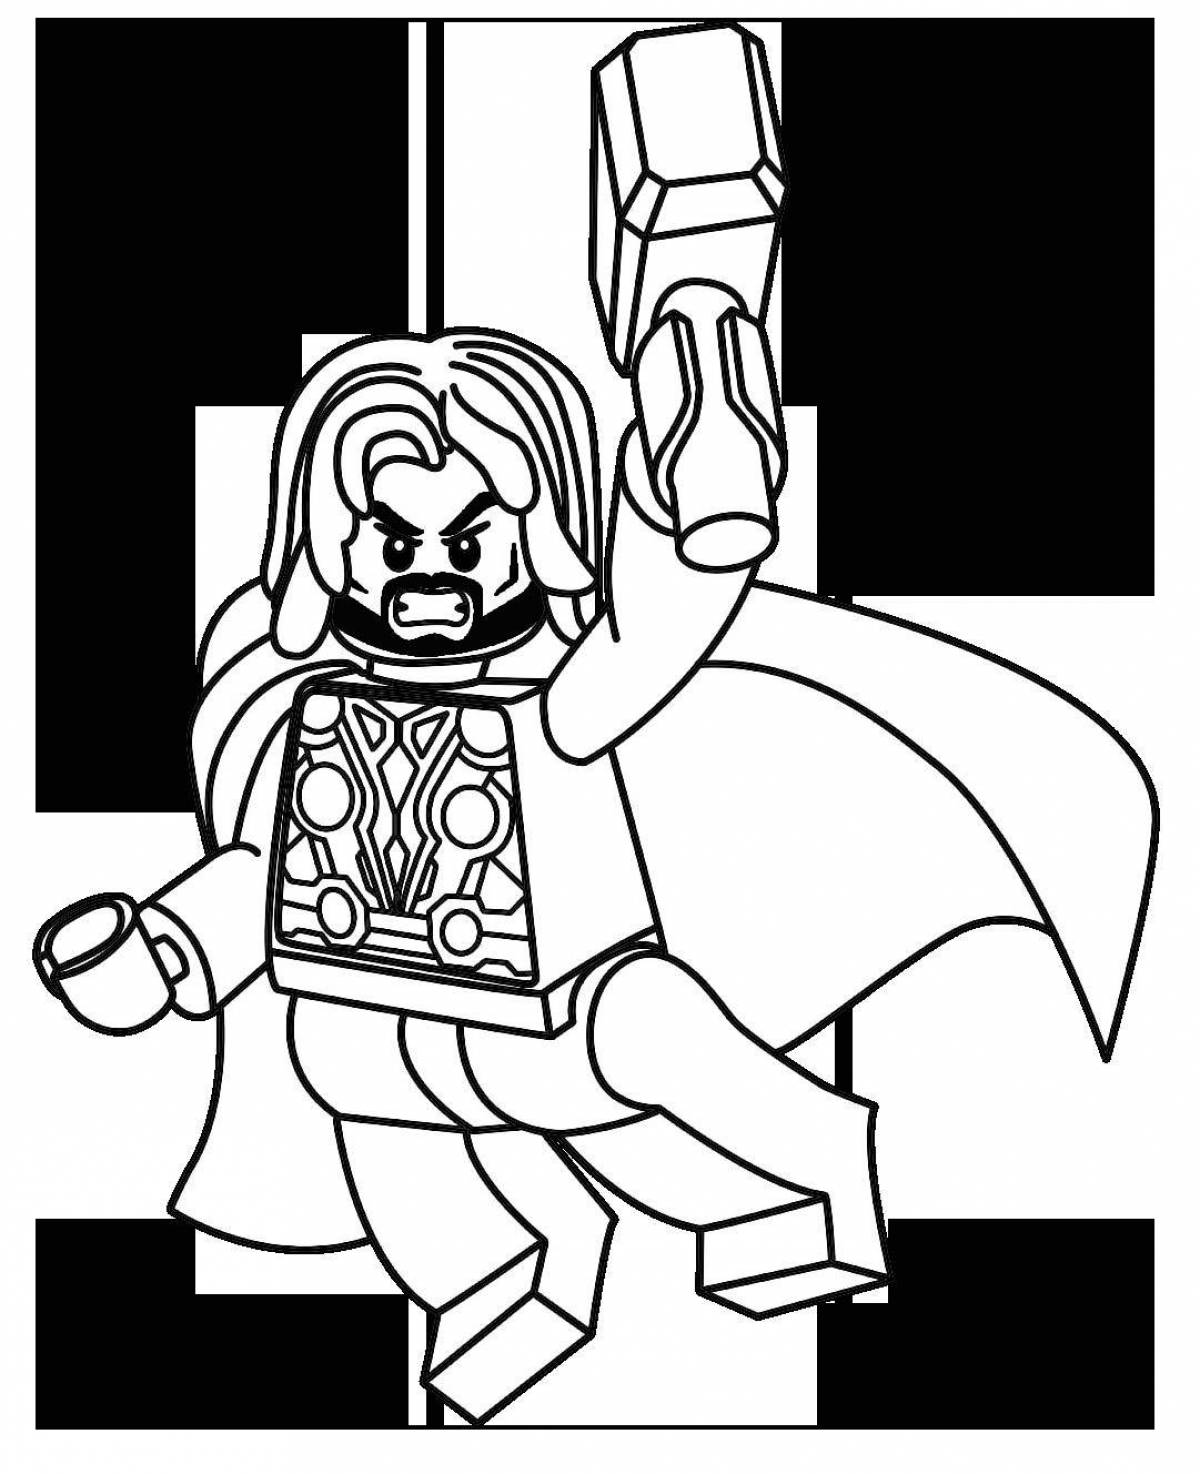 Adorable Thor coloring page for kids